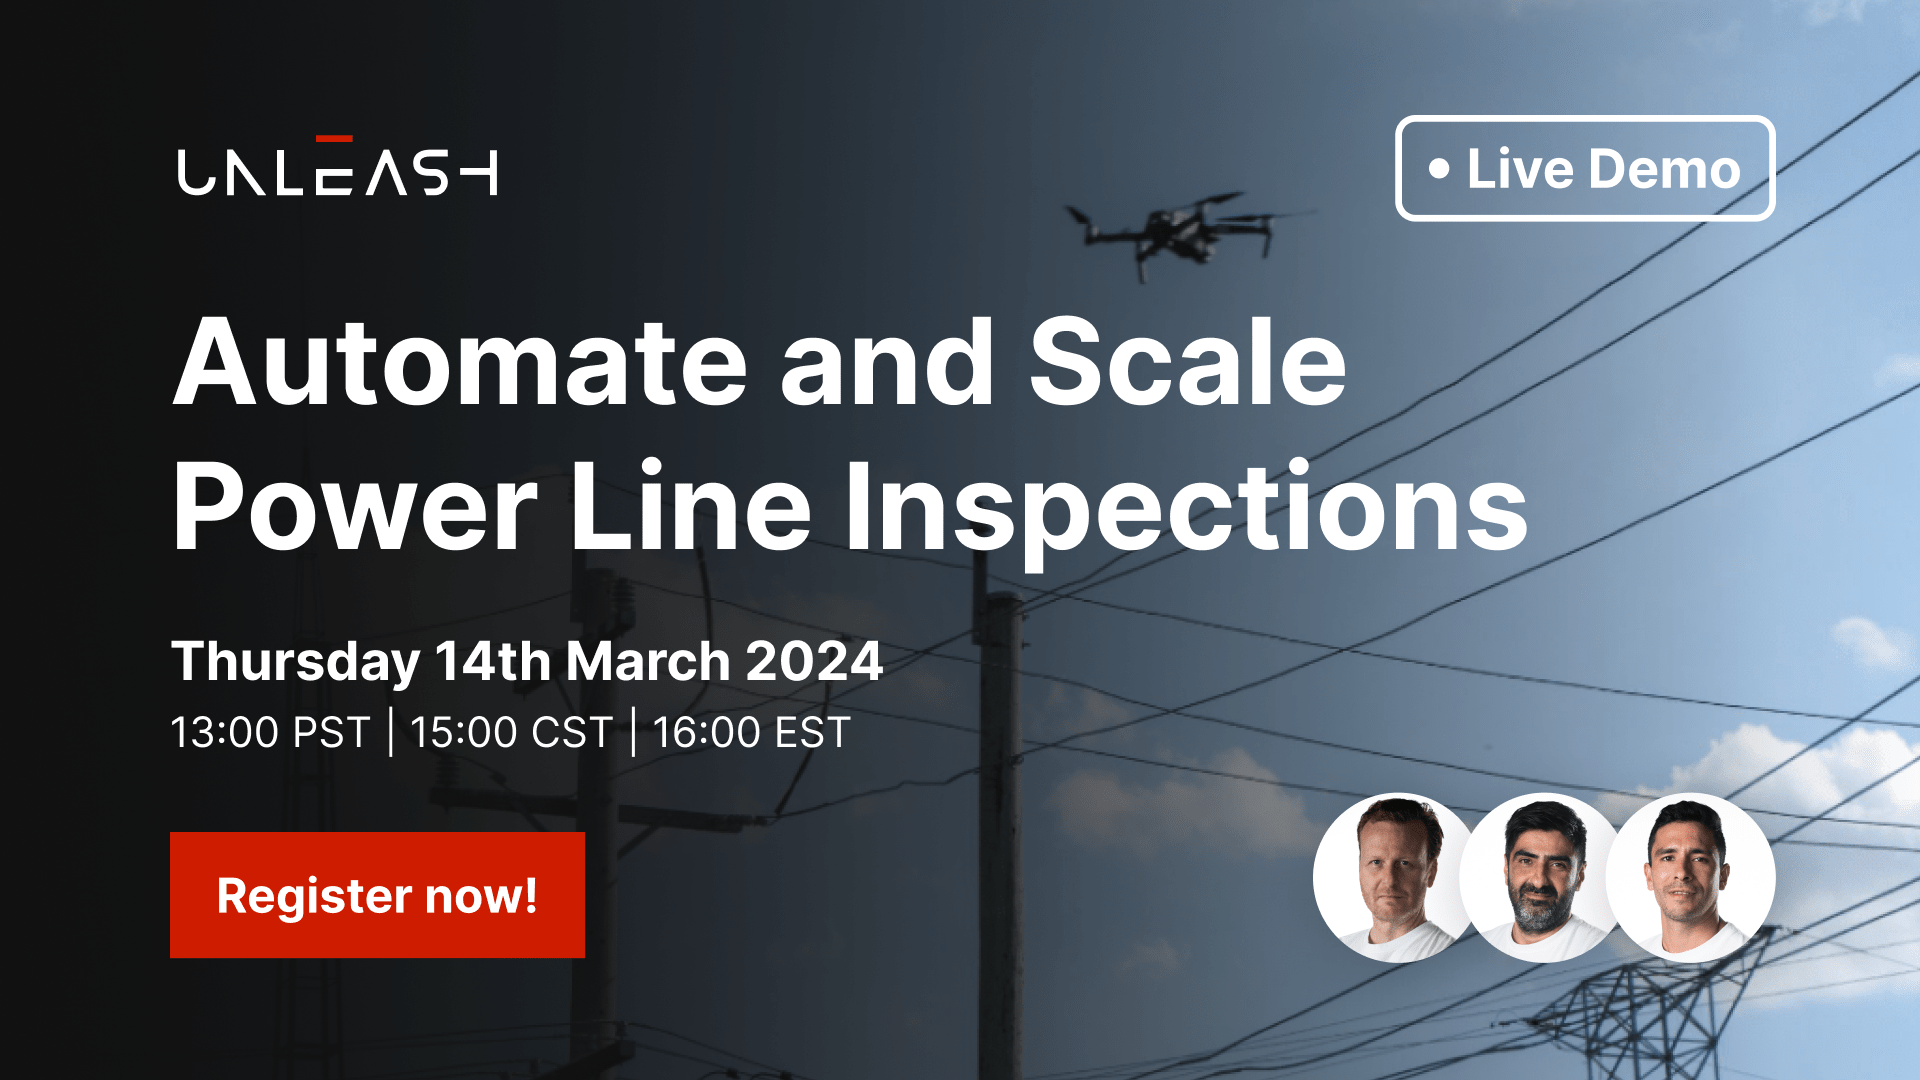 Webinar - Automate and Scale Power Line Inspections